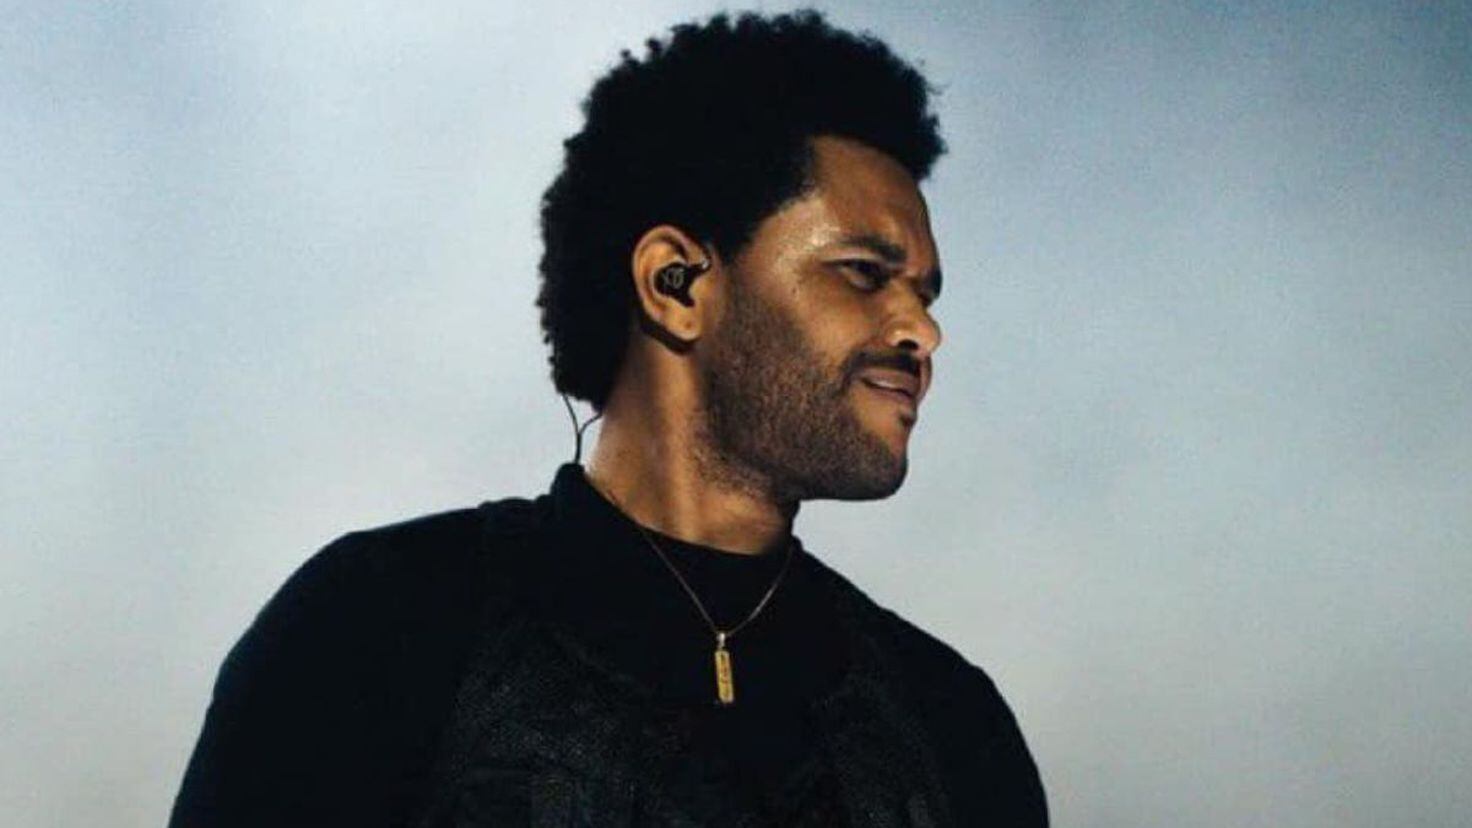 The Weeknd is almost done being a featured artist